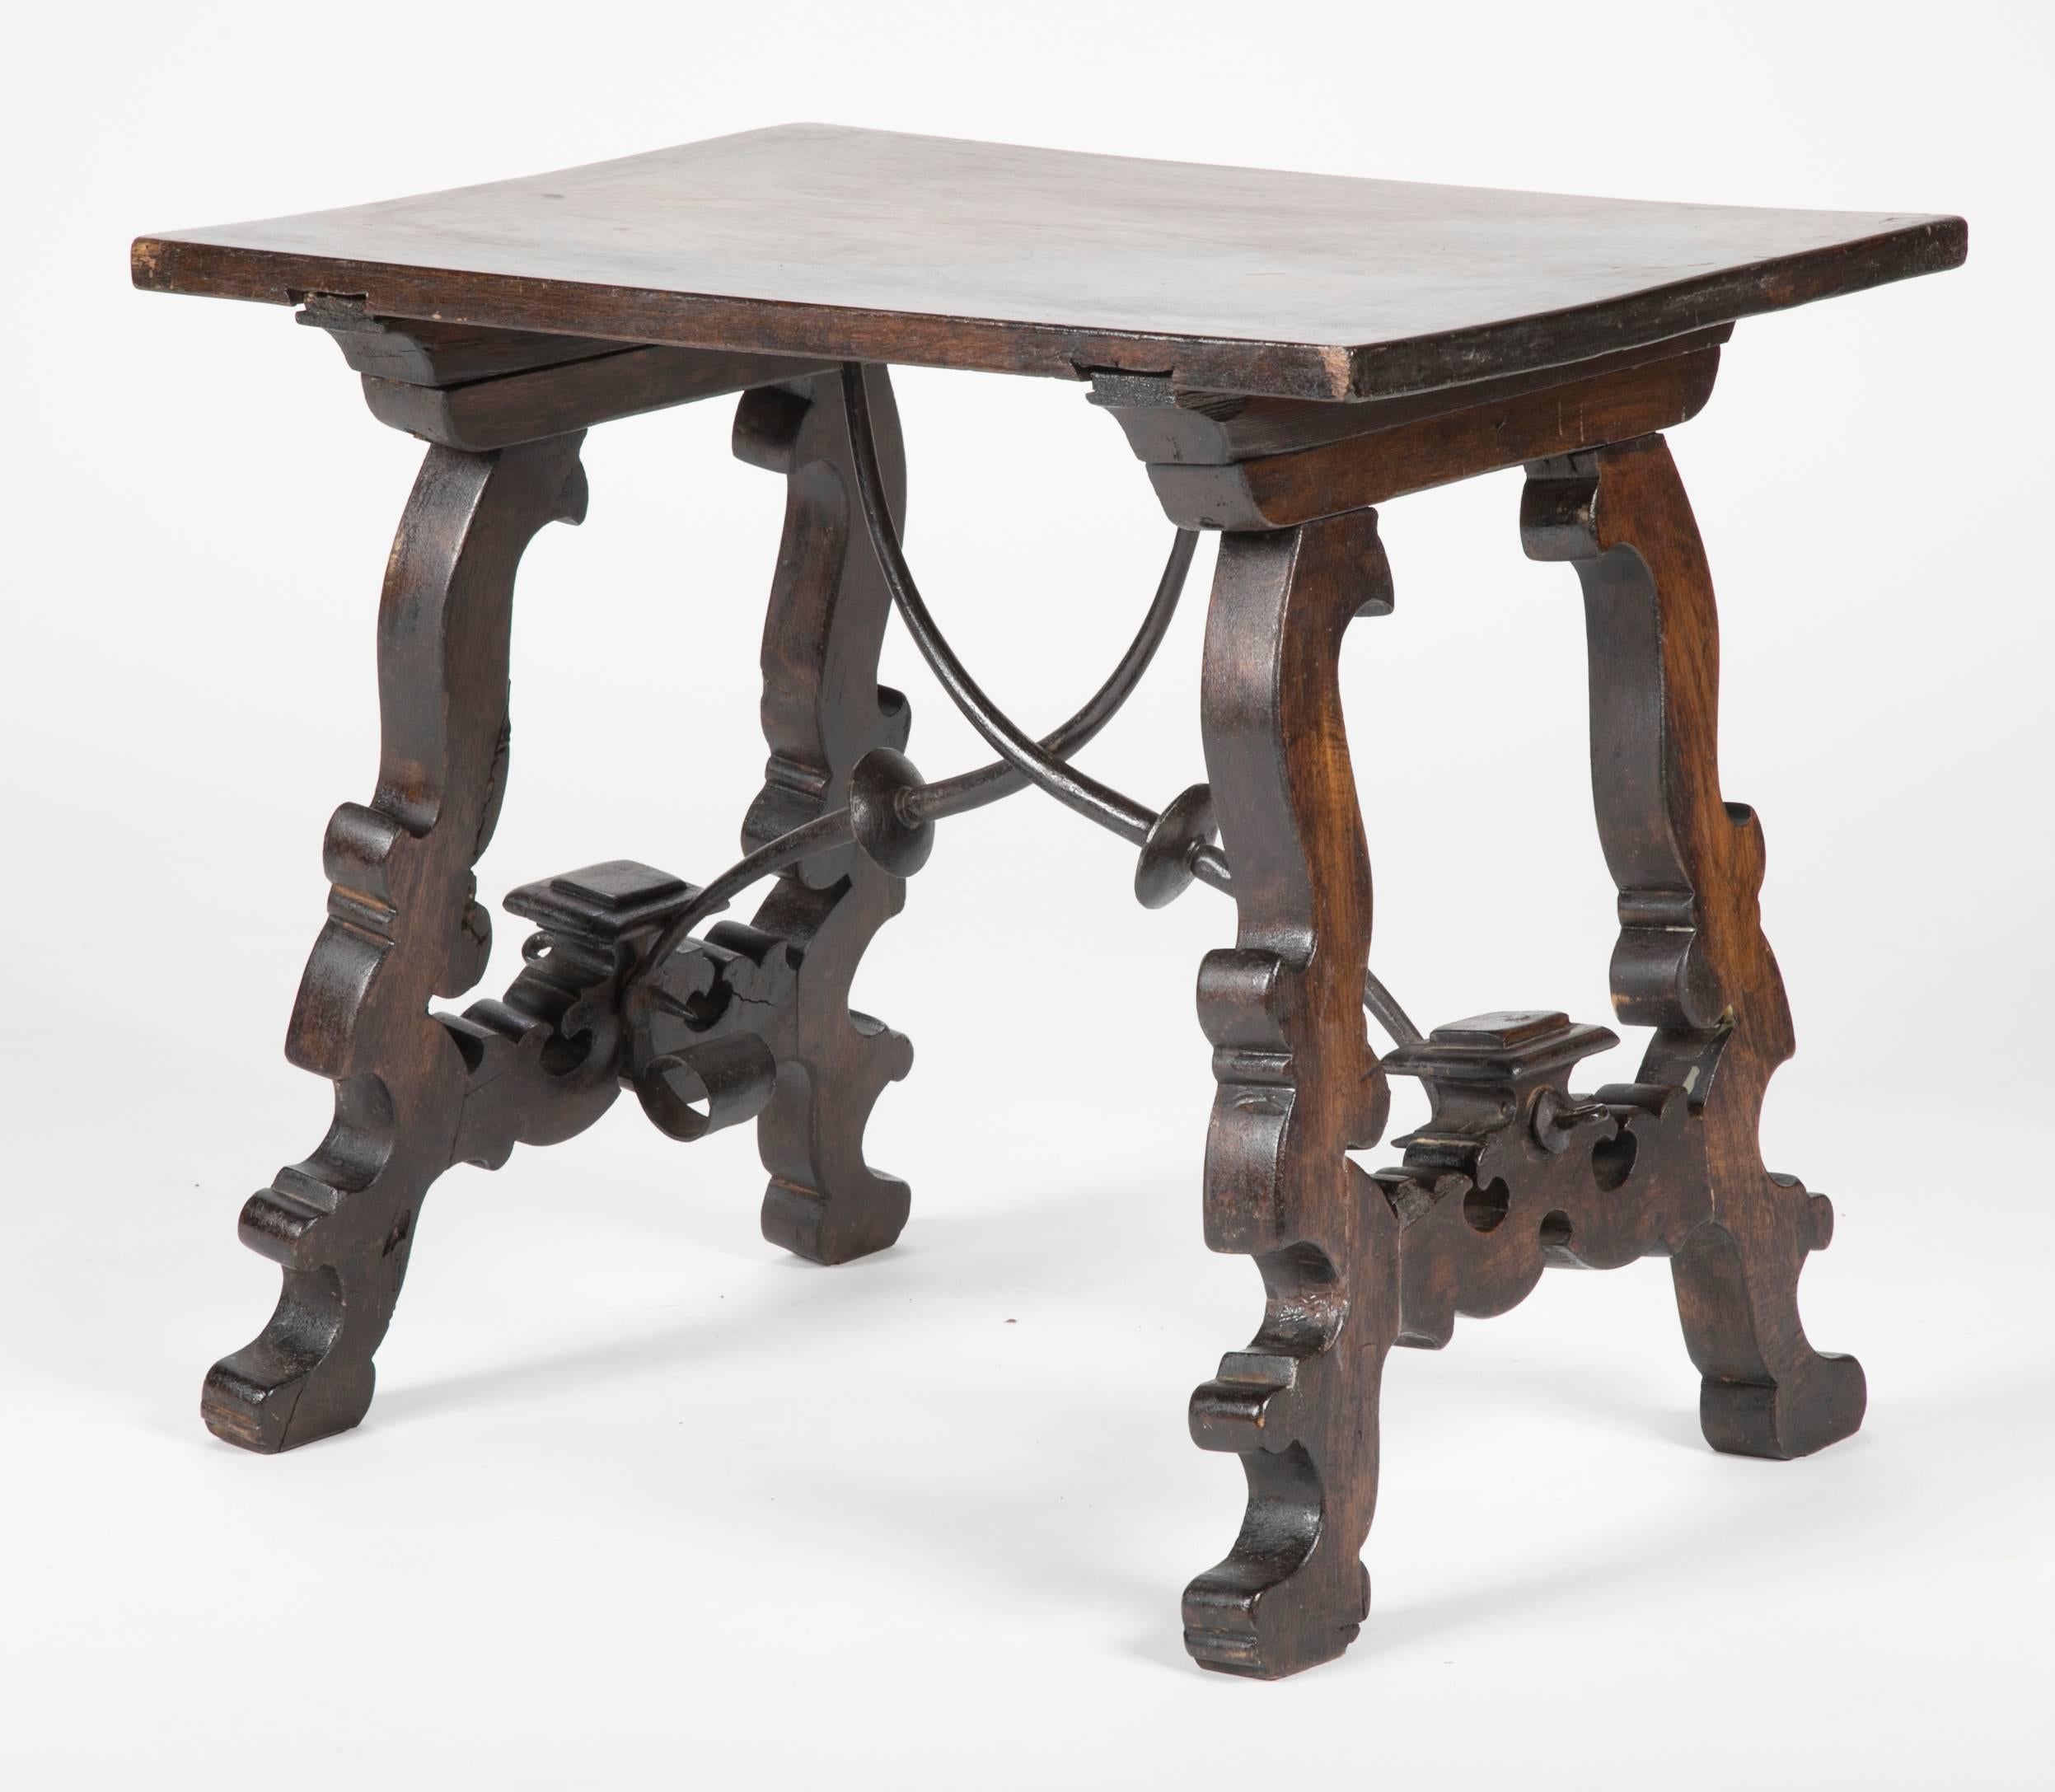 A lovely Spanish walnut side table with exceptional carving to the legs, joined by wrought iron stretchers typical of the Baroque style. A side or end table with real presence.